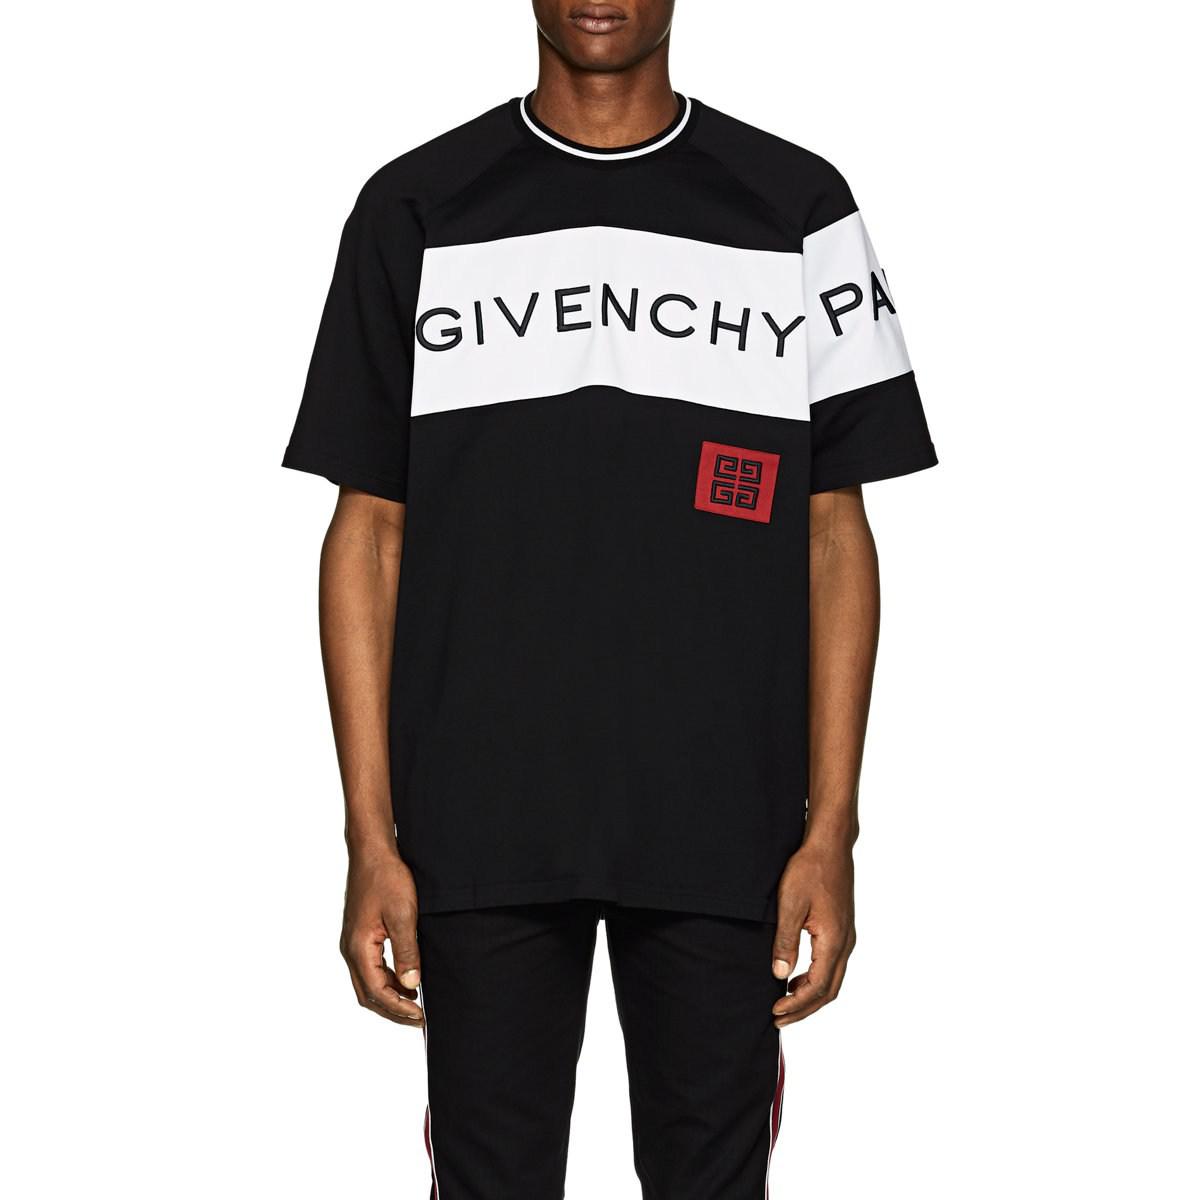 Givenchy 4g Embroidered T-shirt in Black for Men - Lyst